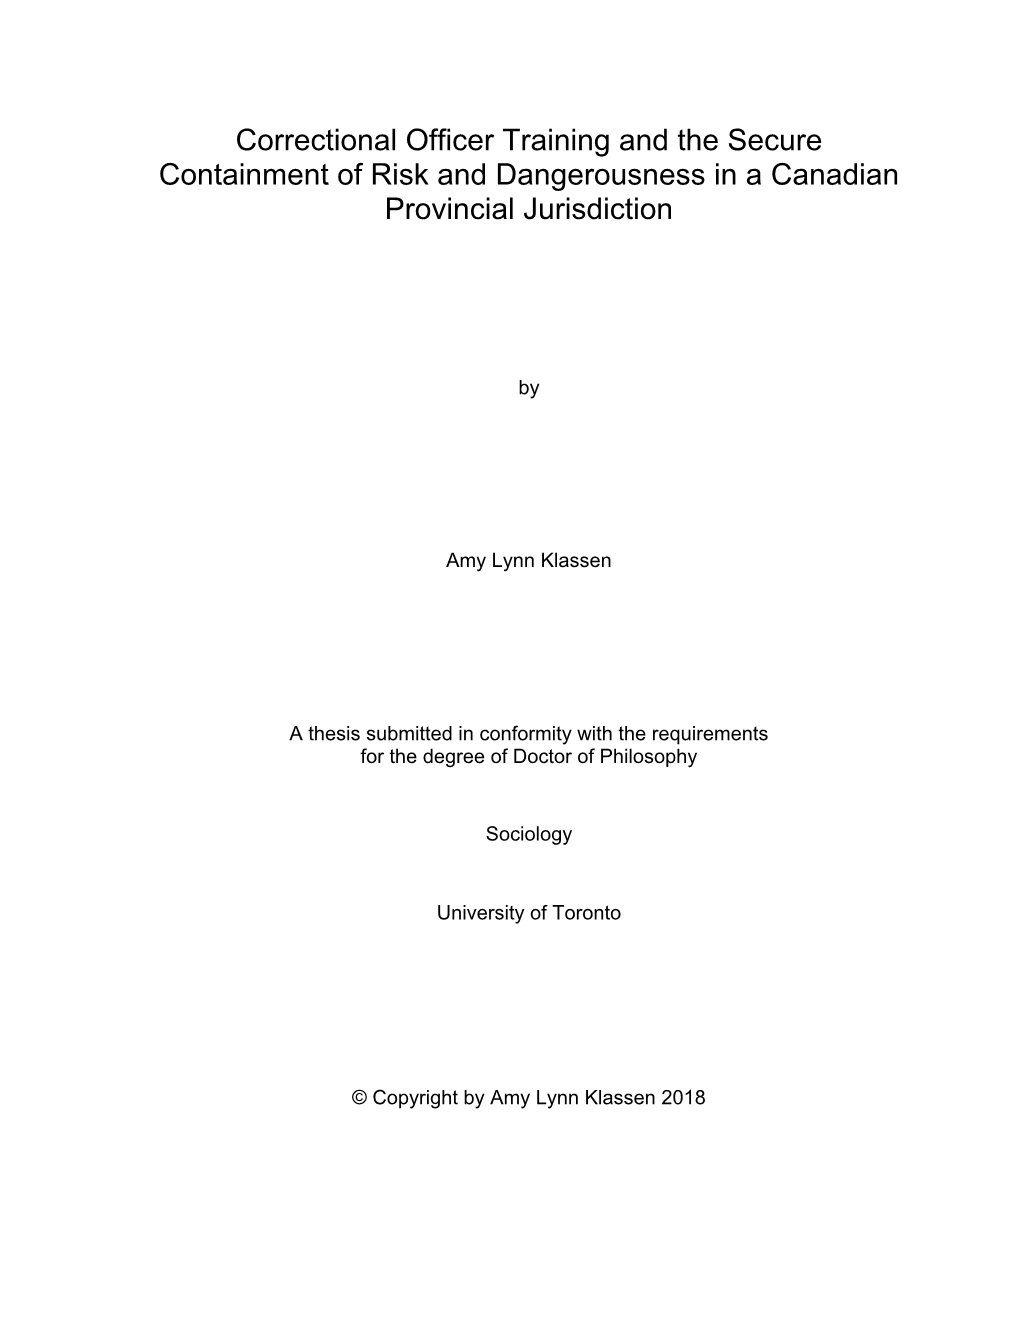 Correctional Officer Training and the Secure Containment of Risk and Dangerousness in a Canadian Provincial Jurisdiction